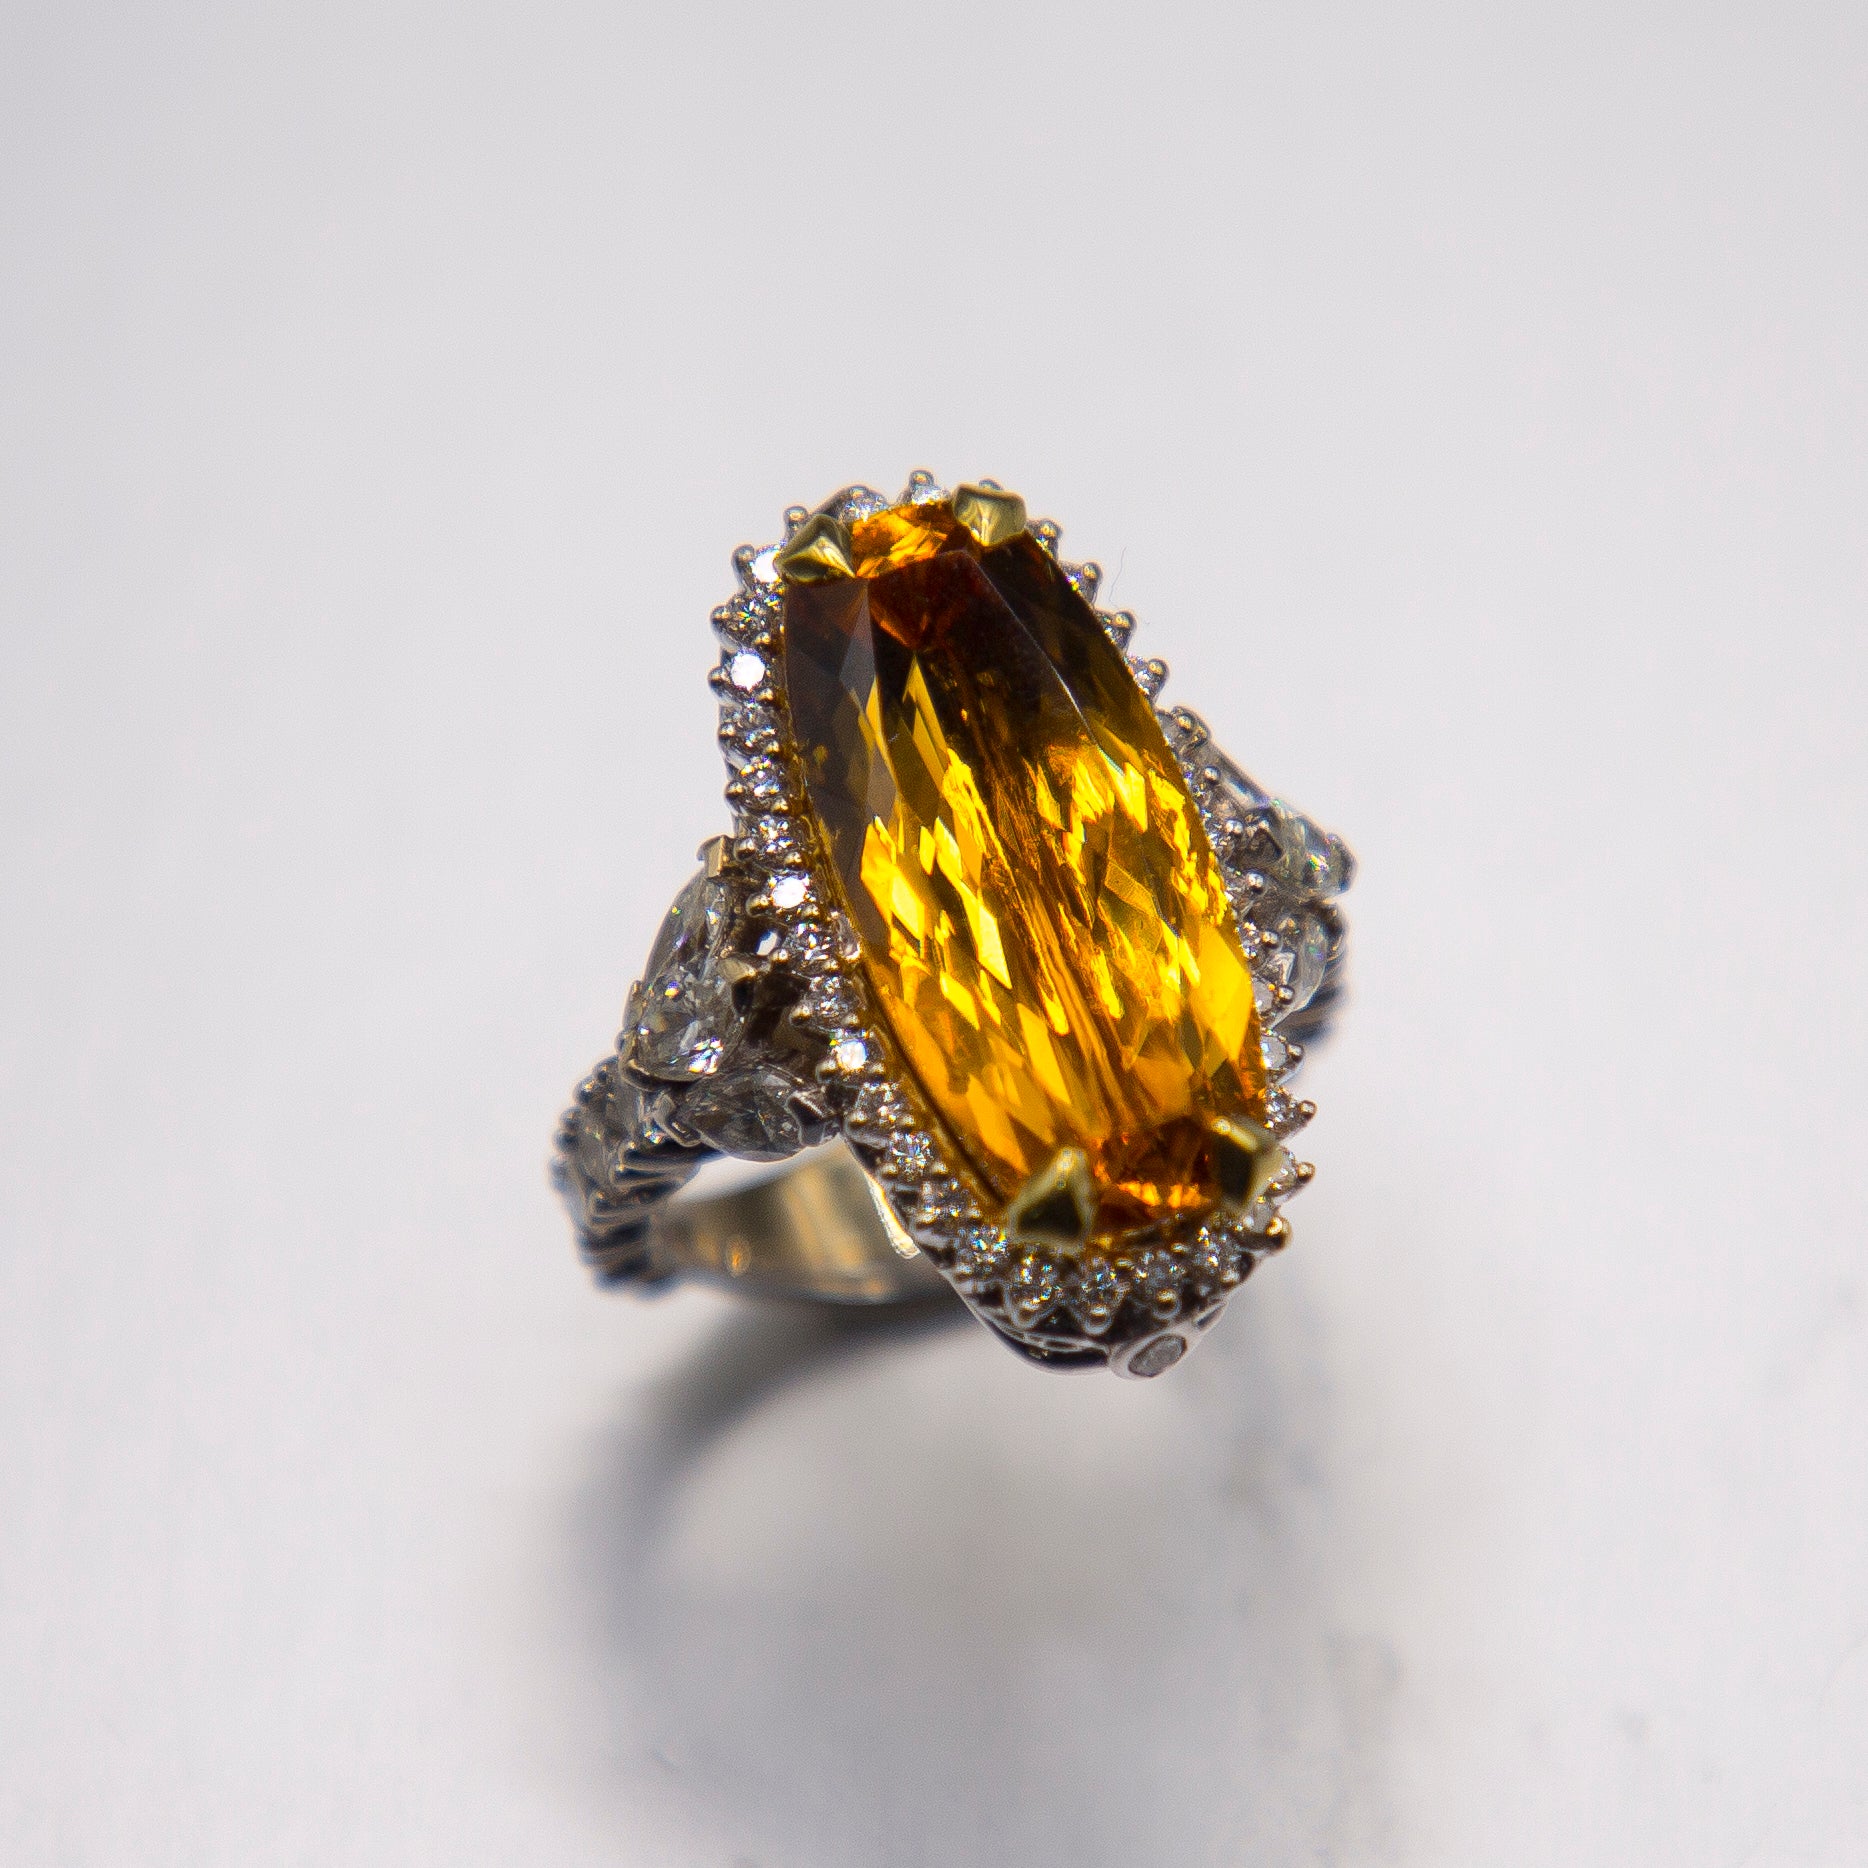 10.20 Imperial Topaz Idar Oberstein-cut Cognac color 3.64cts.  18k Diamond Ring For Sale